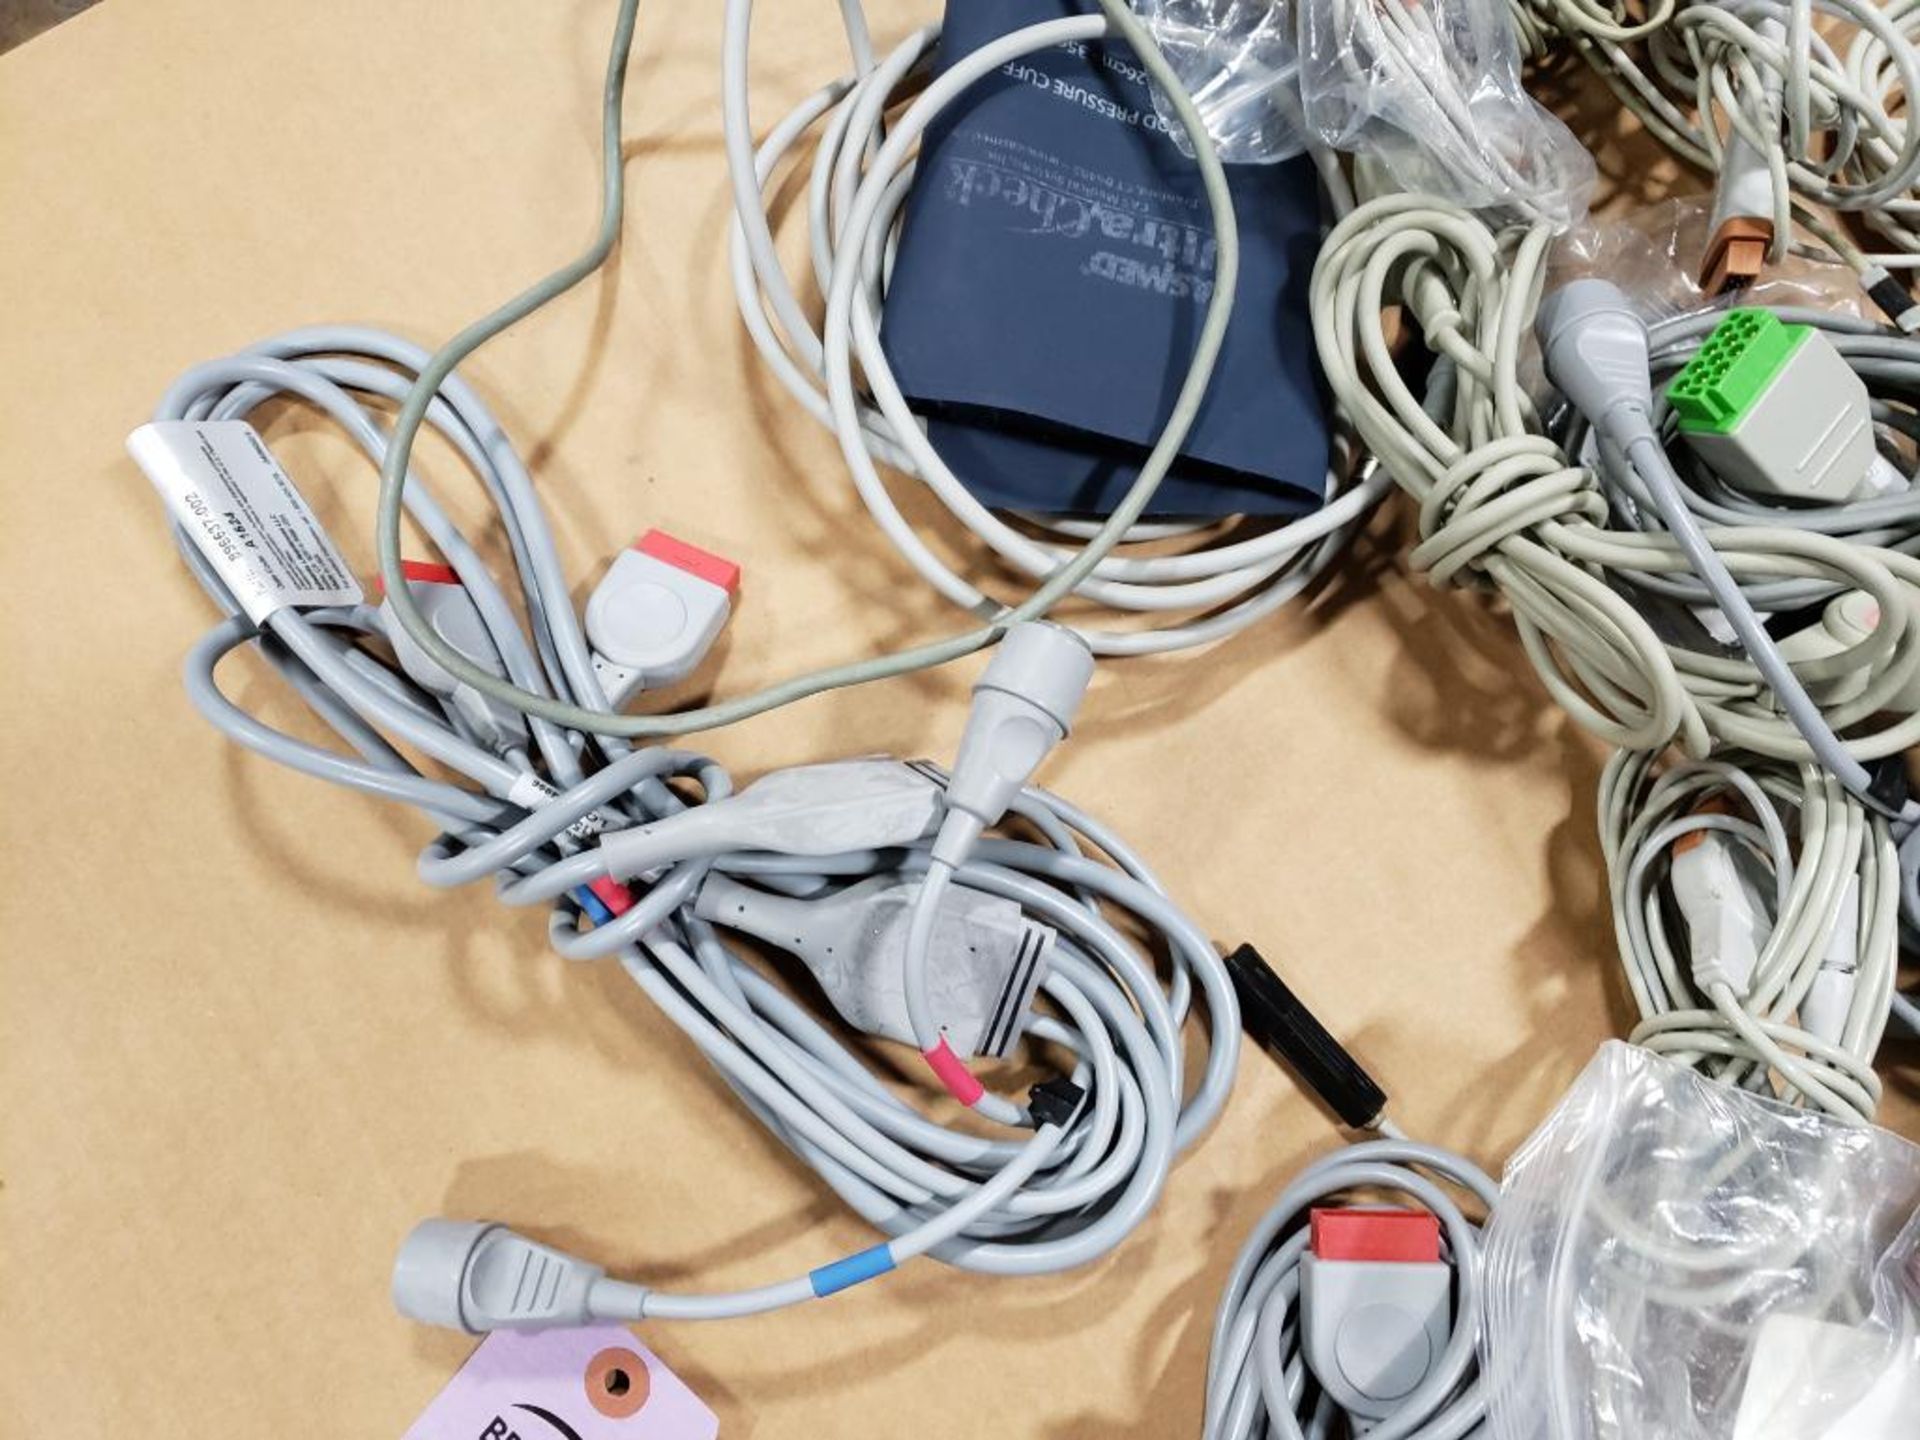 Large assortment of cords and cables. - Image 10 of 11